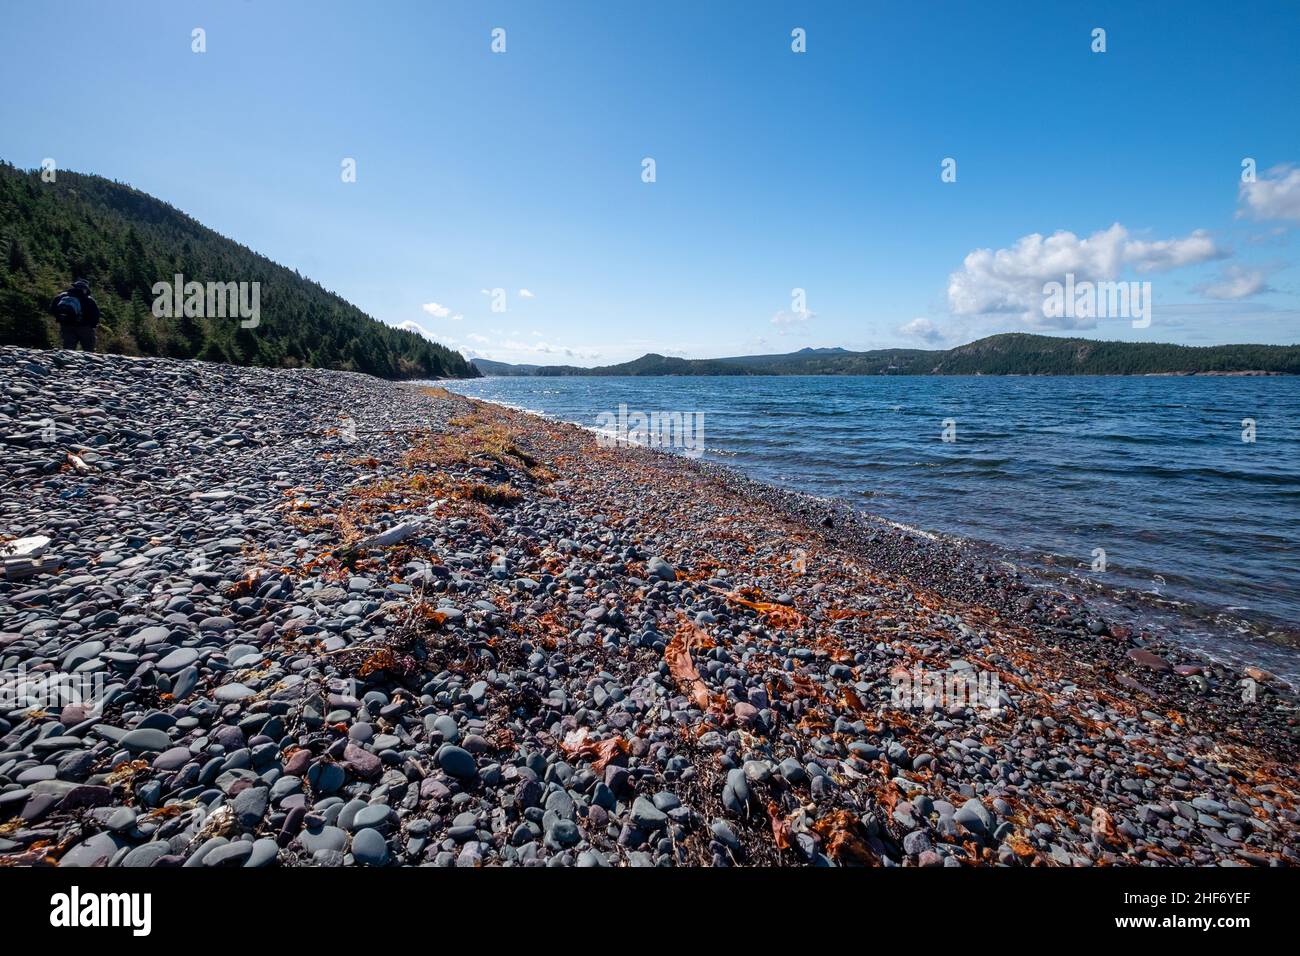 A wide cove or bay with a mountain covered with green fir trees under blue skies and a few clouds. The sandy beach has a row of orange seaweed. Stock Photo